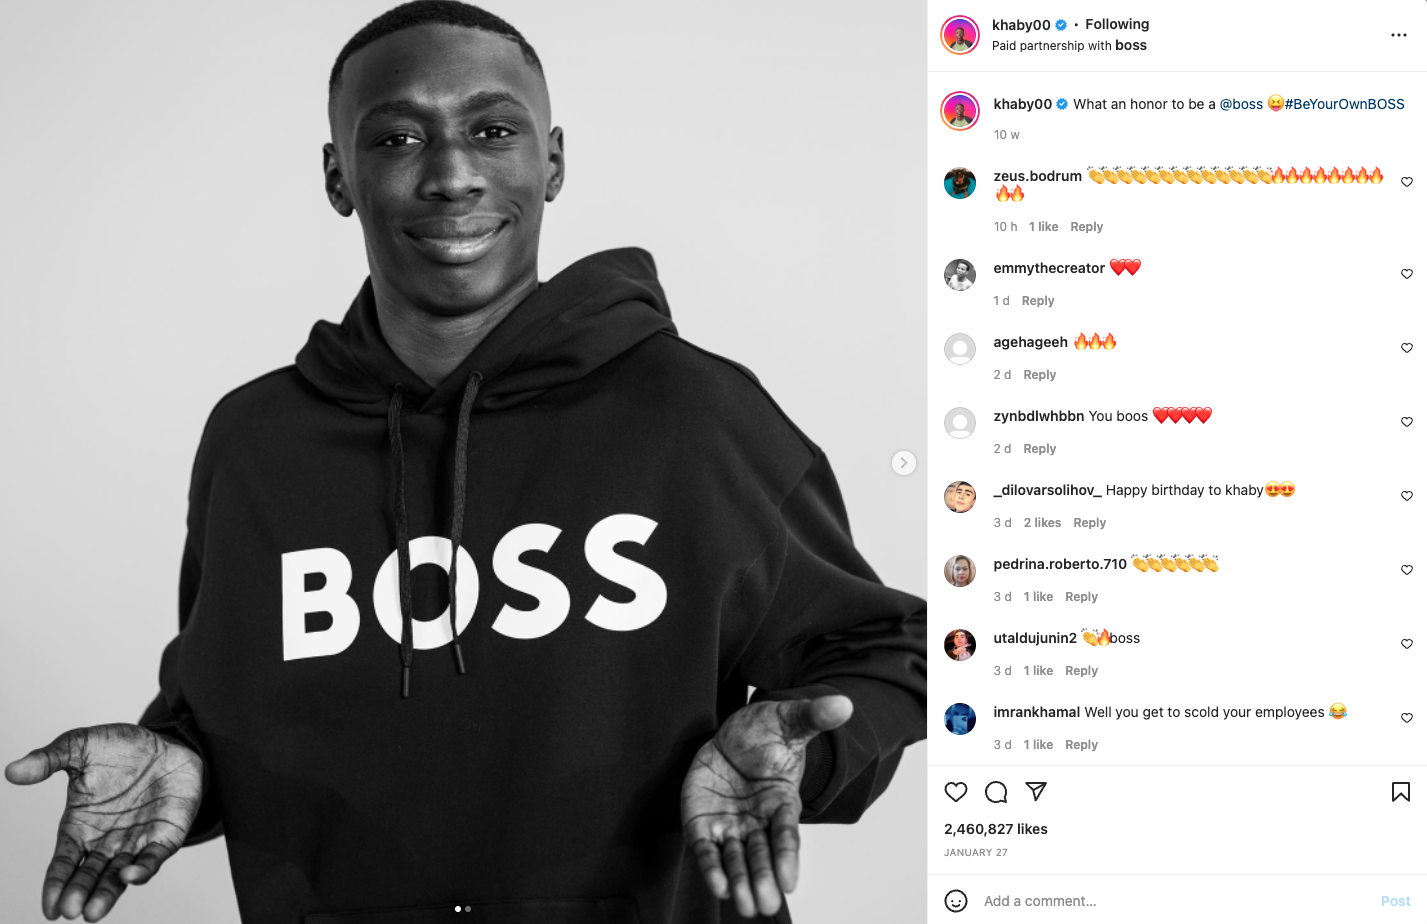 Image of Khaby00, an Instagram content creator, in a black hoodie that reads BOSS featuring comments on his social media post